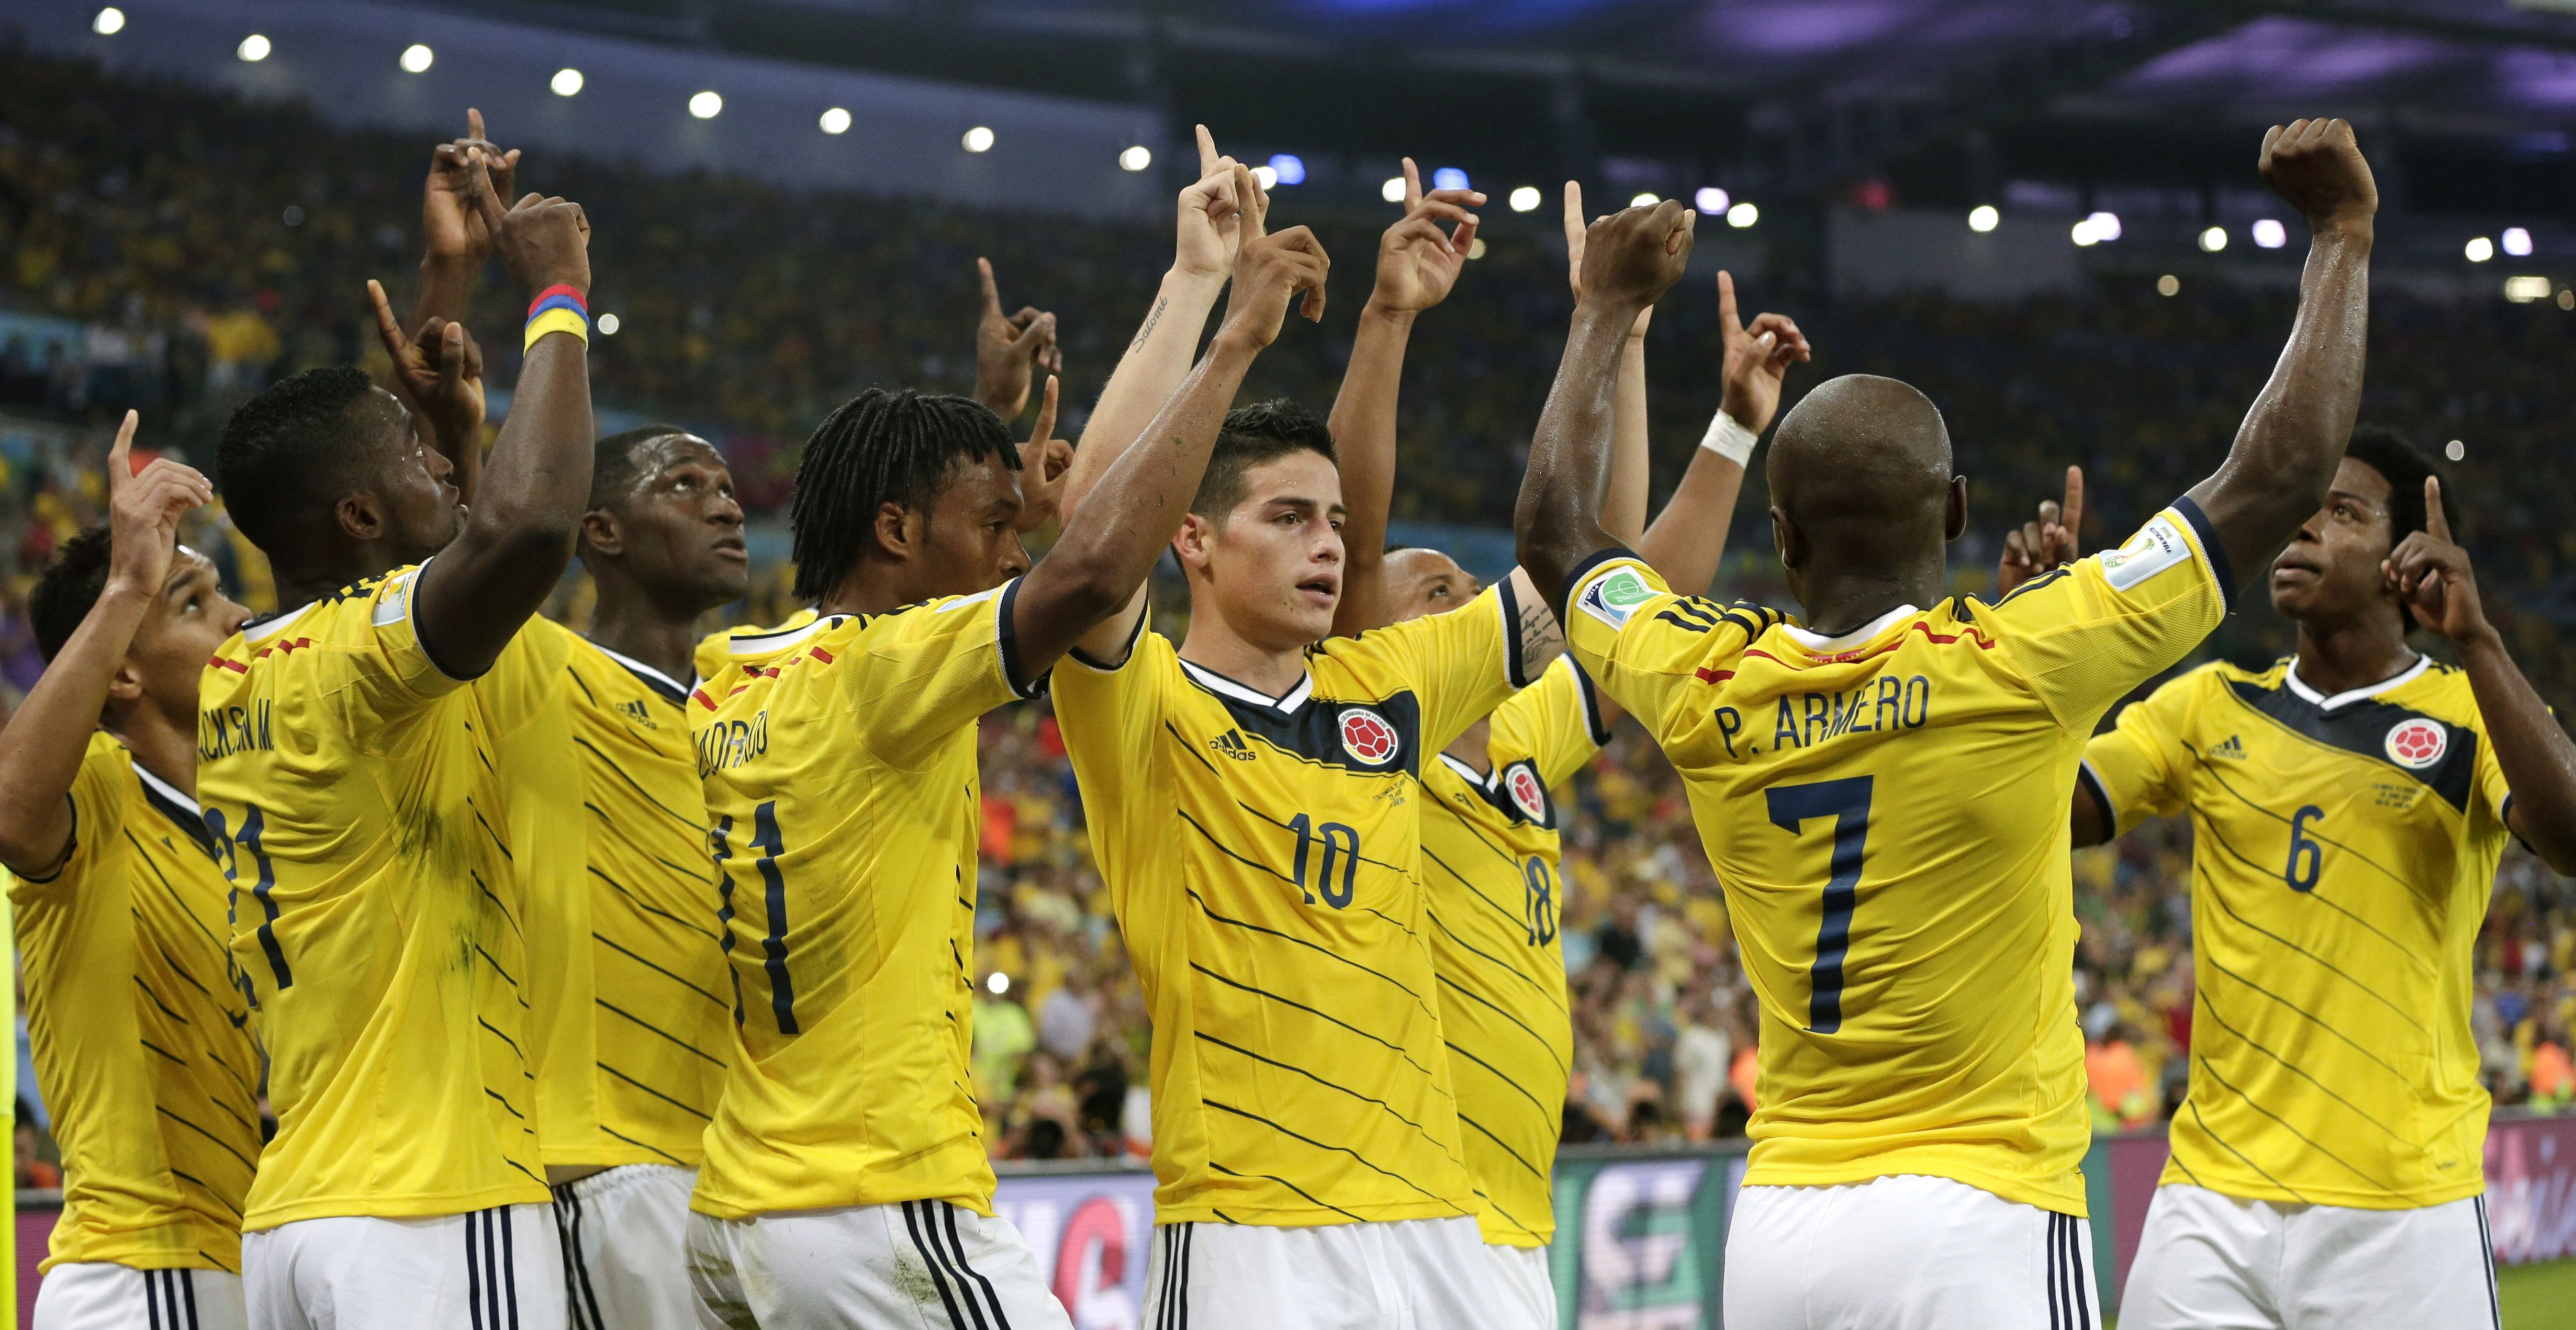 Colombia national football team